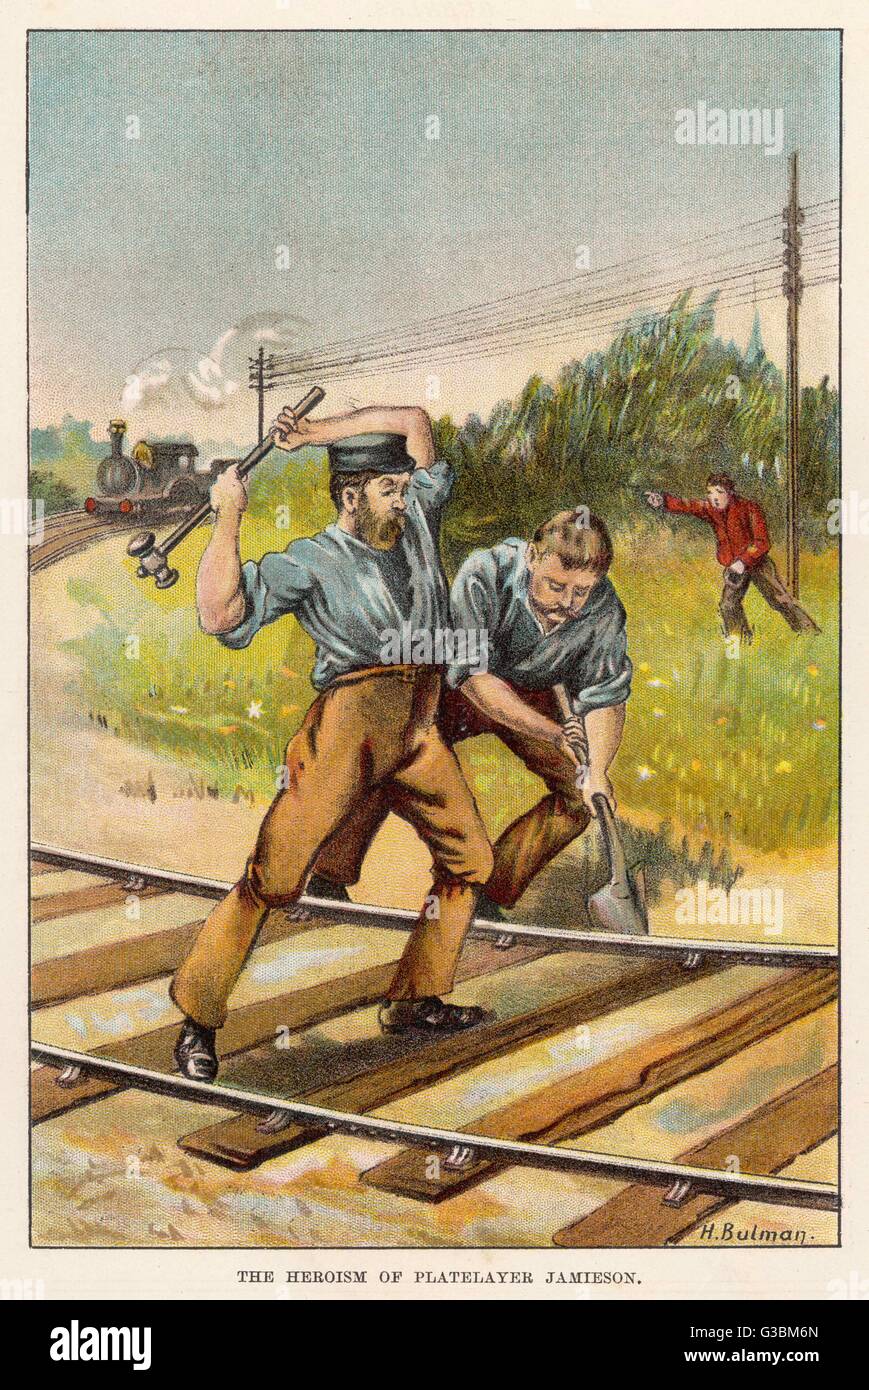 Jamieson, platelayer on the  Glasgow-Paisley line, notices  that a sleeper is insecure ;  he and his nephew put it right  as a train approaches, but  unfortunately both are killed.     Date: 1874 Stock Photo